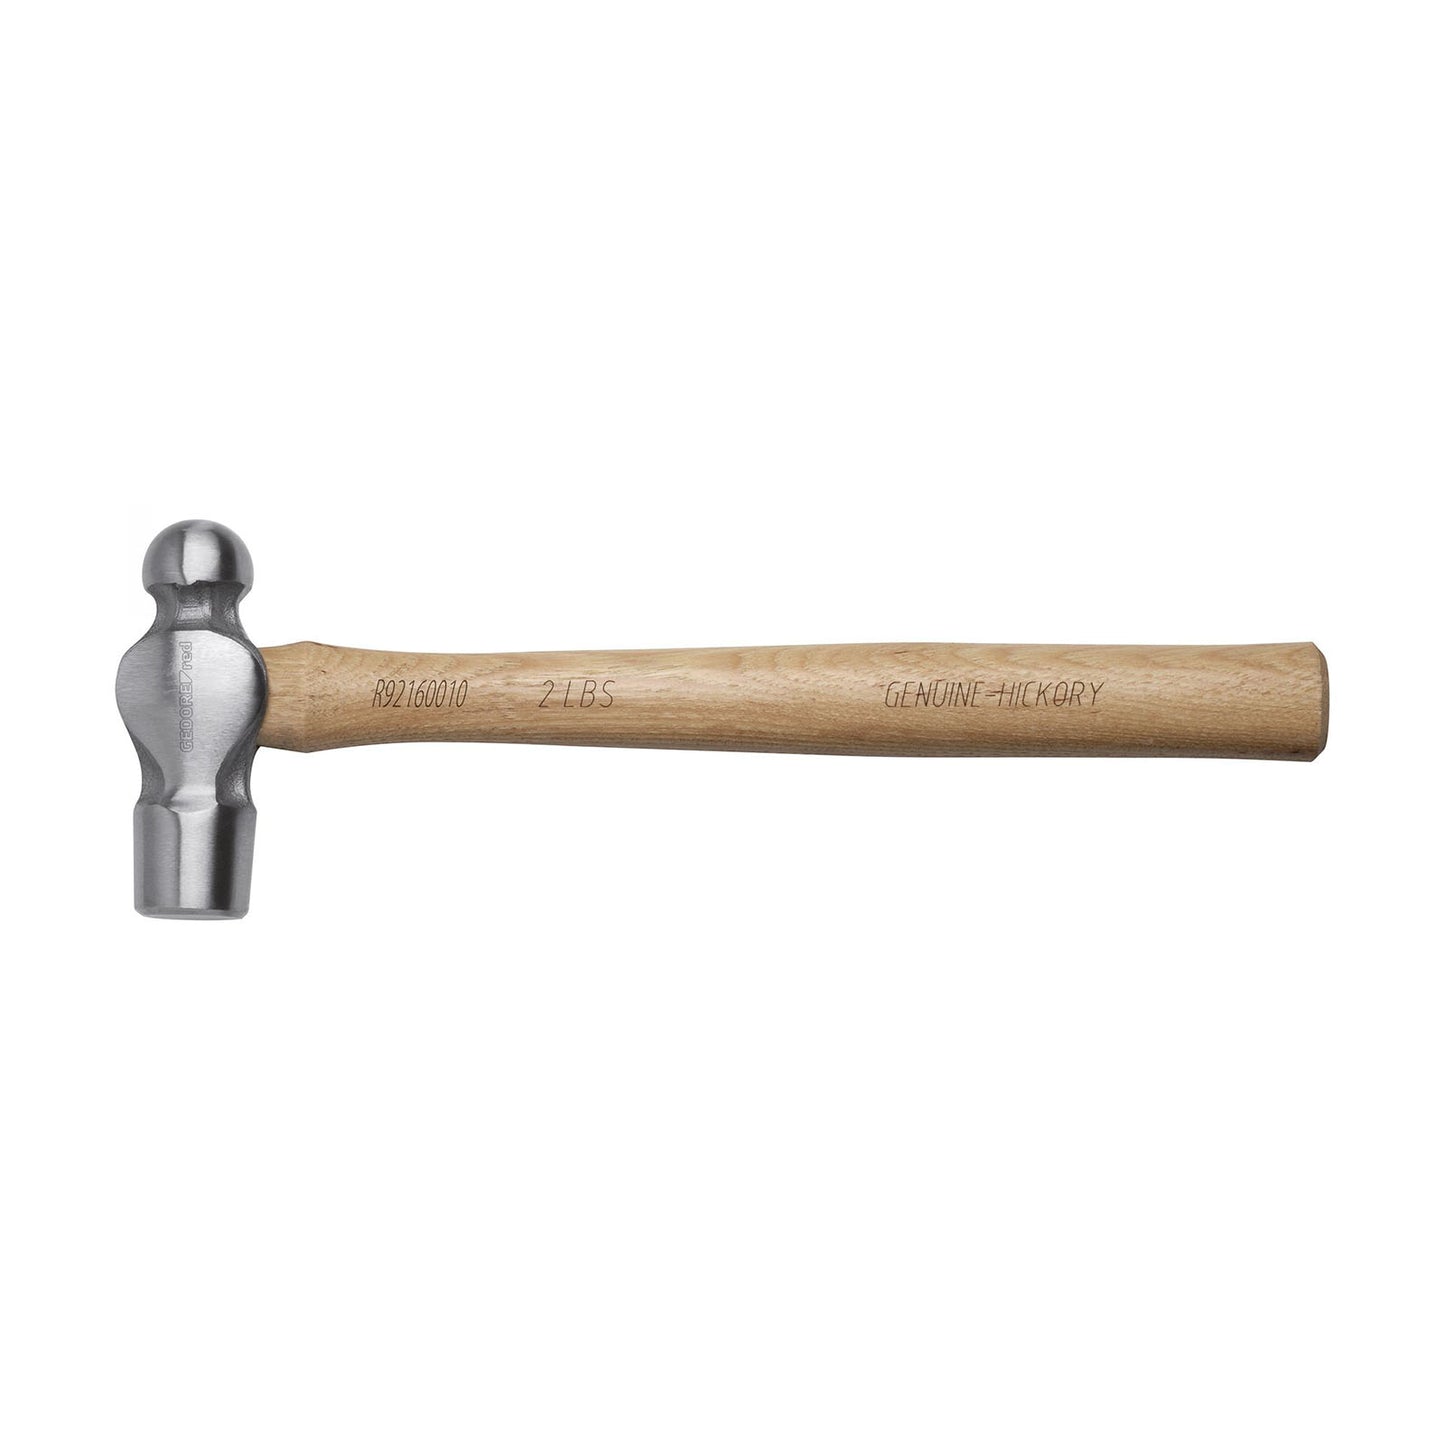 GEDORE red R92160010 - Fitter's hammer, English type 2 pounds walnut (3300771)